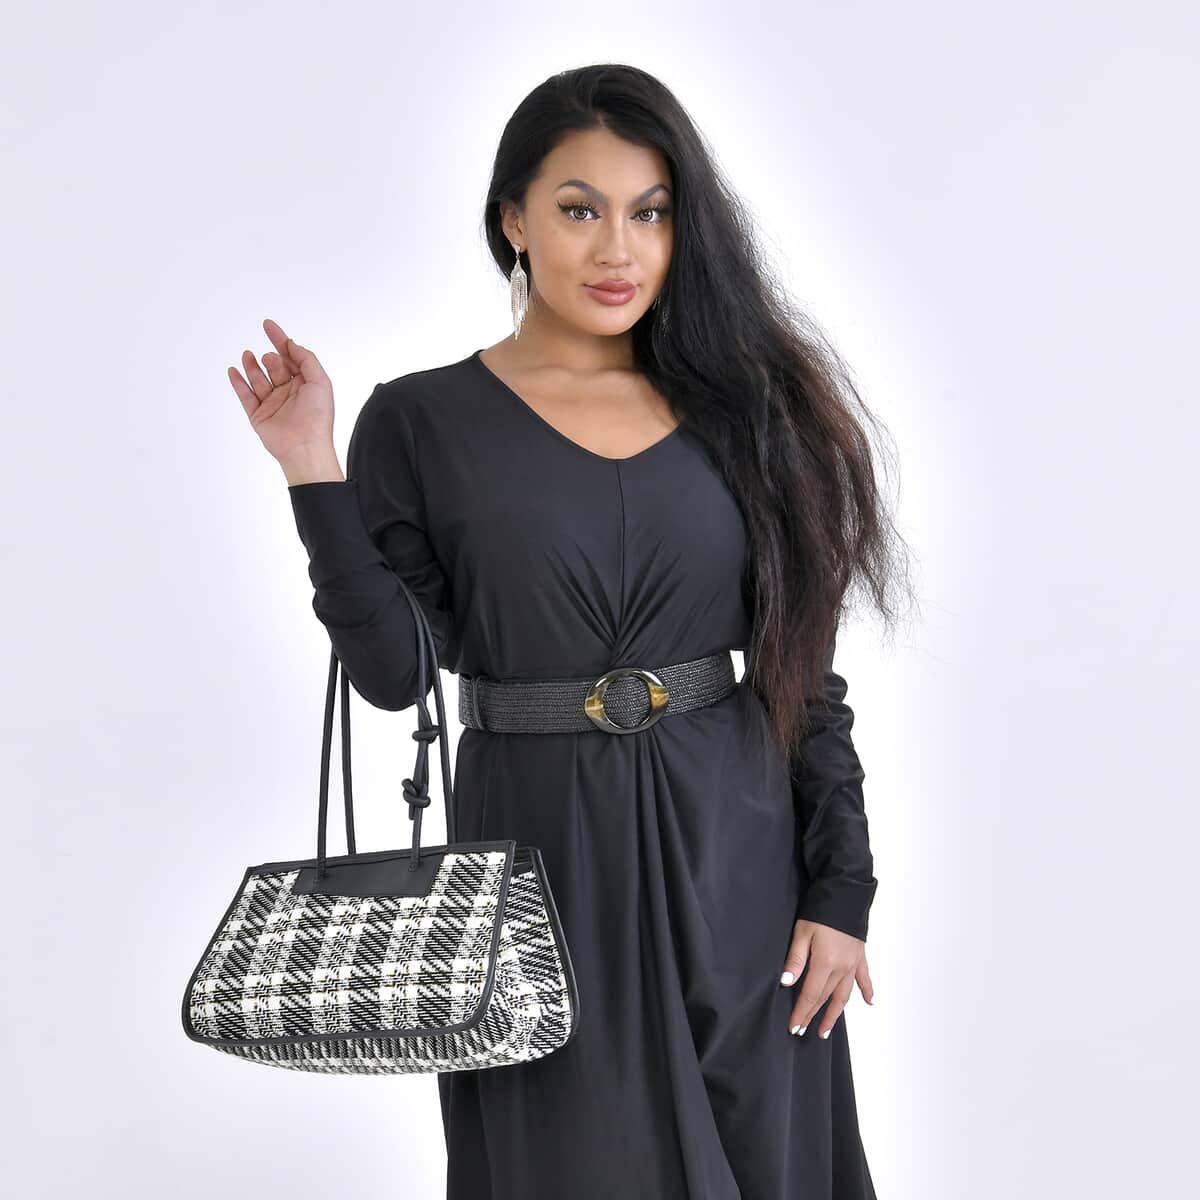 Black and White Plaid Pattern Faux Leather Tote Bag (15.6"x7.9"x5.5") and Cosmetic Bag (9.5"x3"x4.3") image number 1